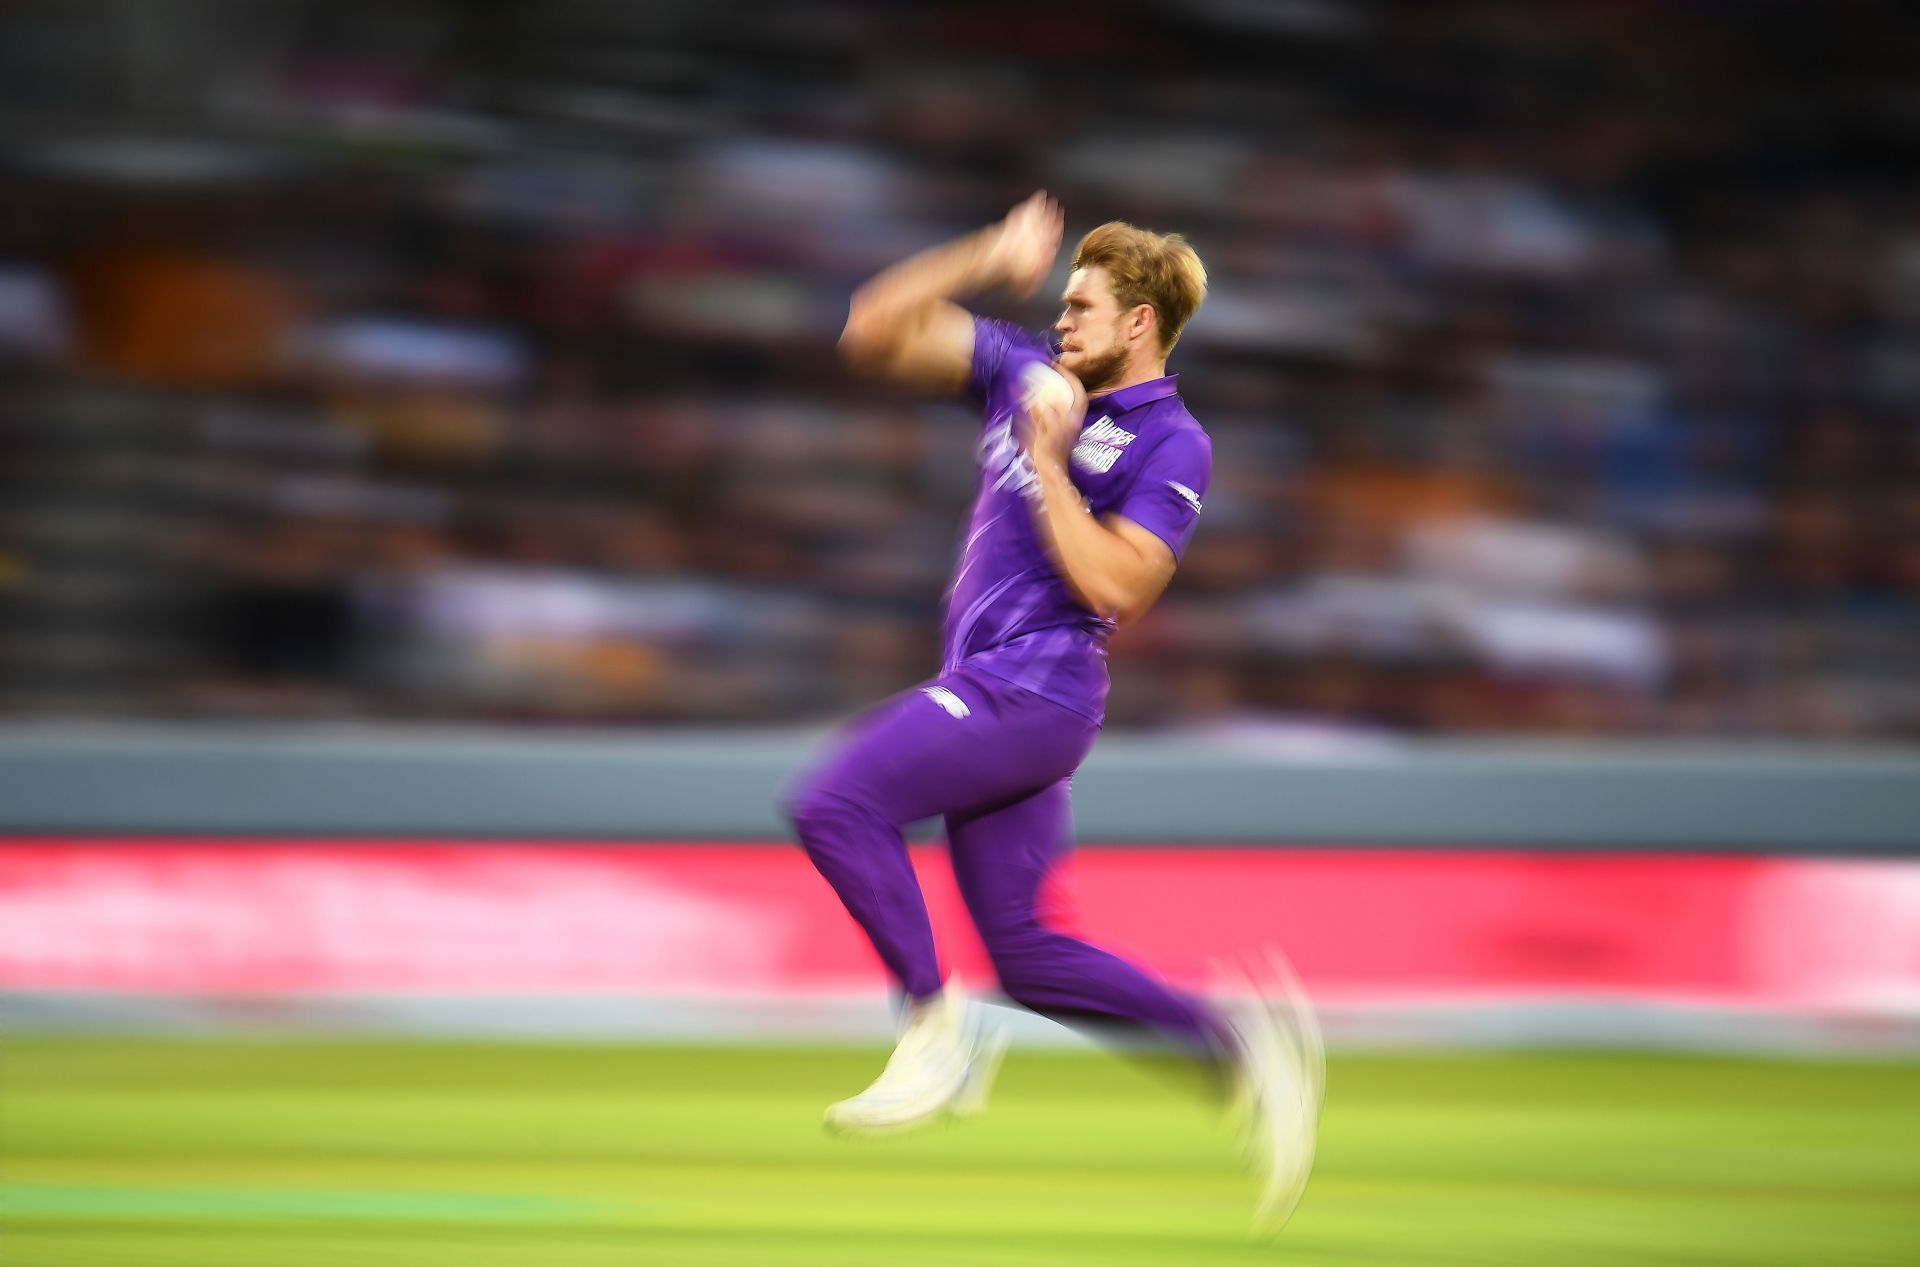 IPL 2022 will see David Willey begin his second stint with the league.